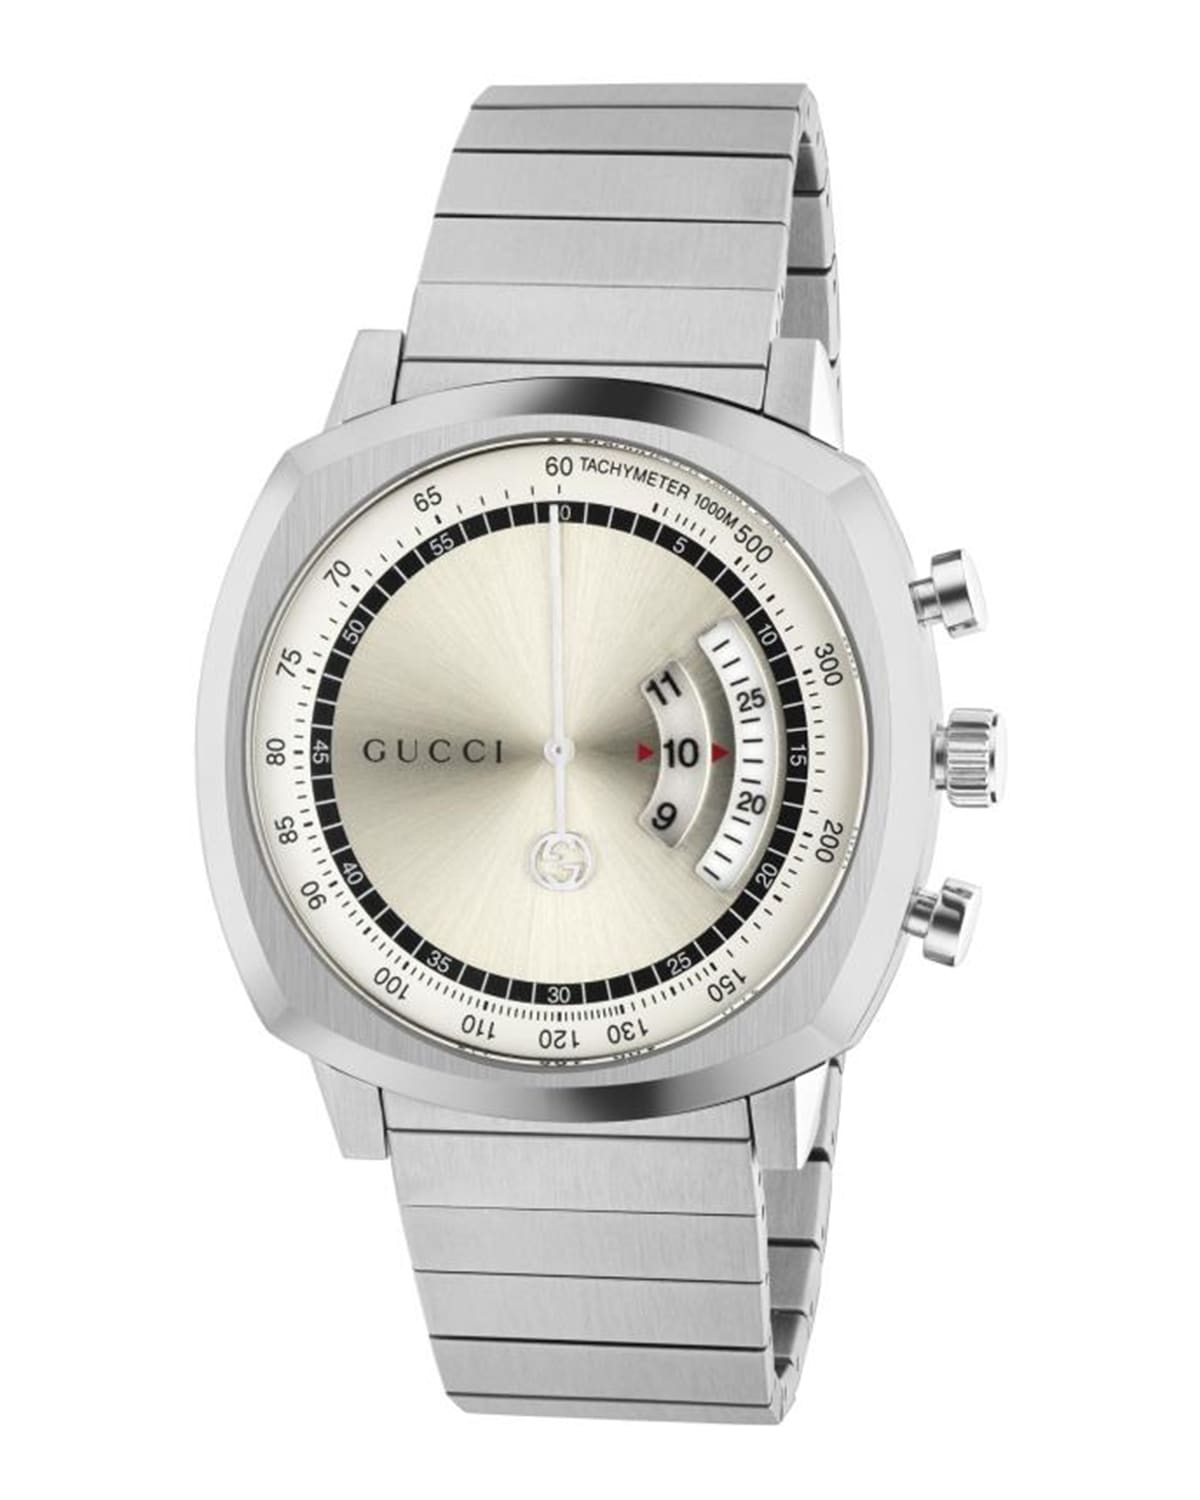 Gucci Men's  Grip 40mm Square Chronograph Watch With Bracelet In Metallic